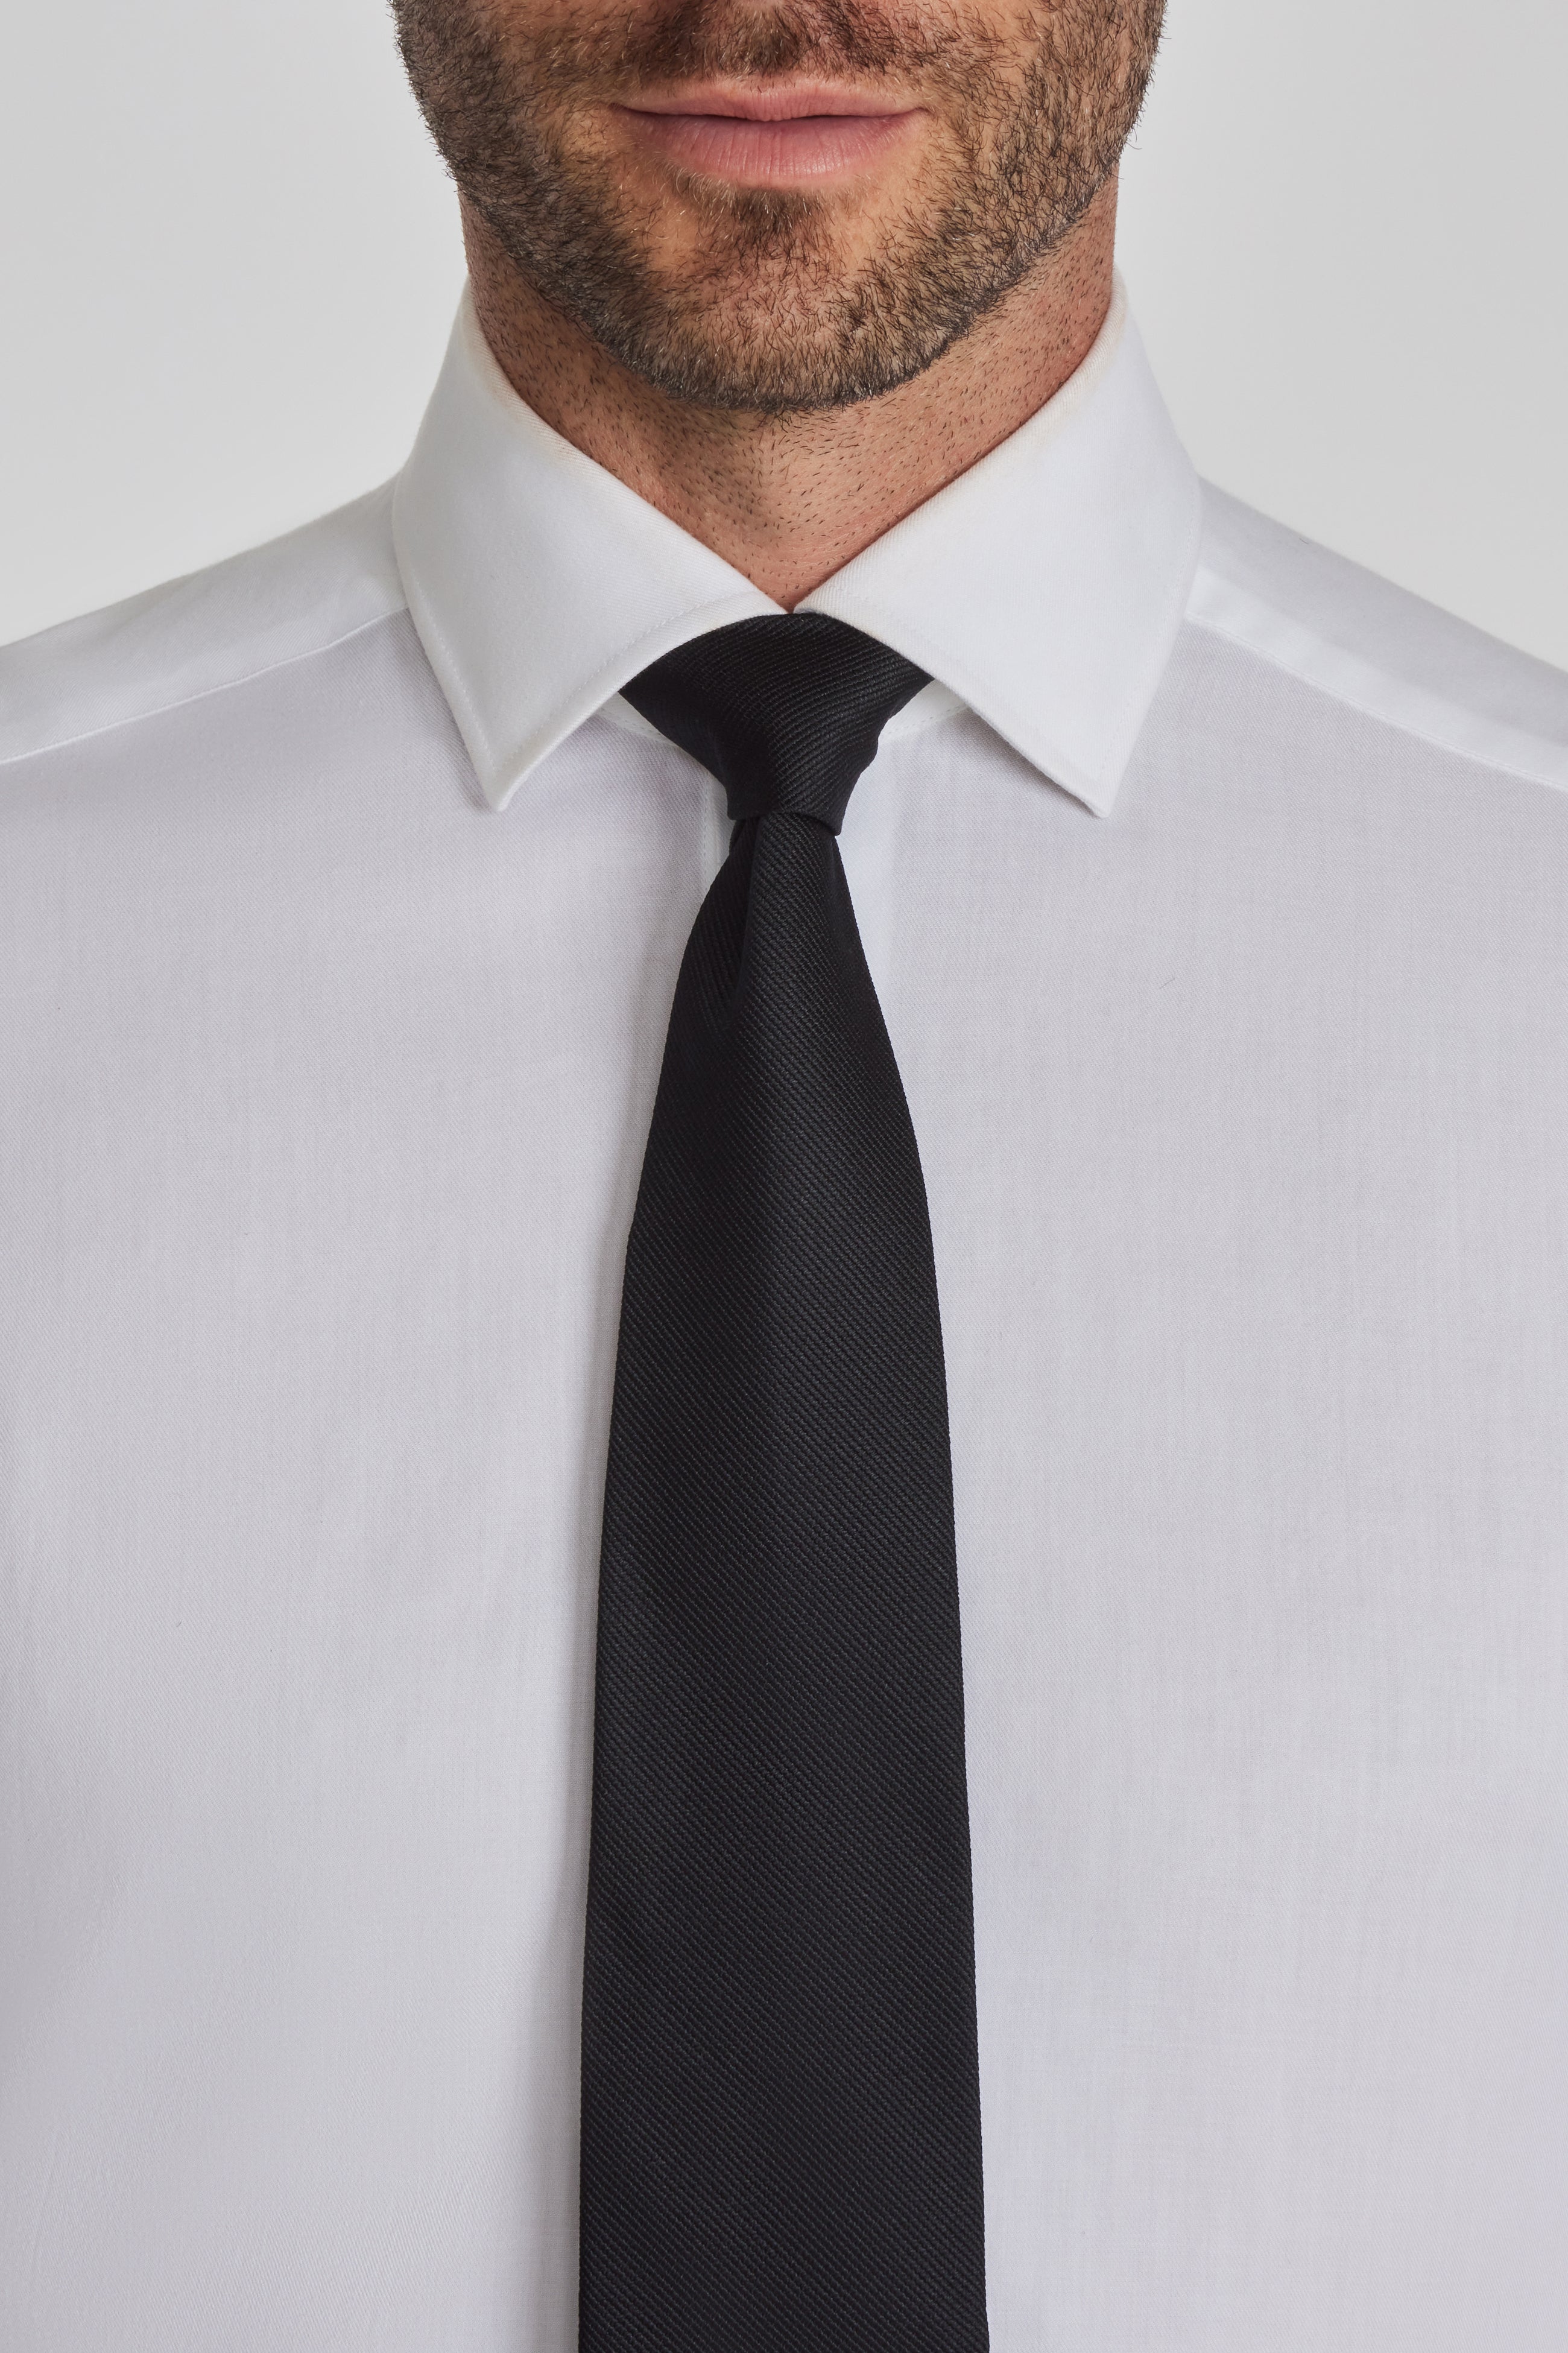 Black Bowman Solid Woven Tie